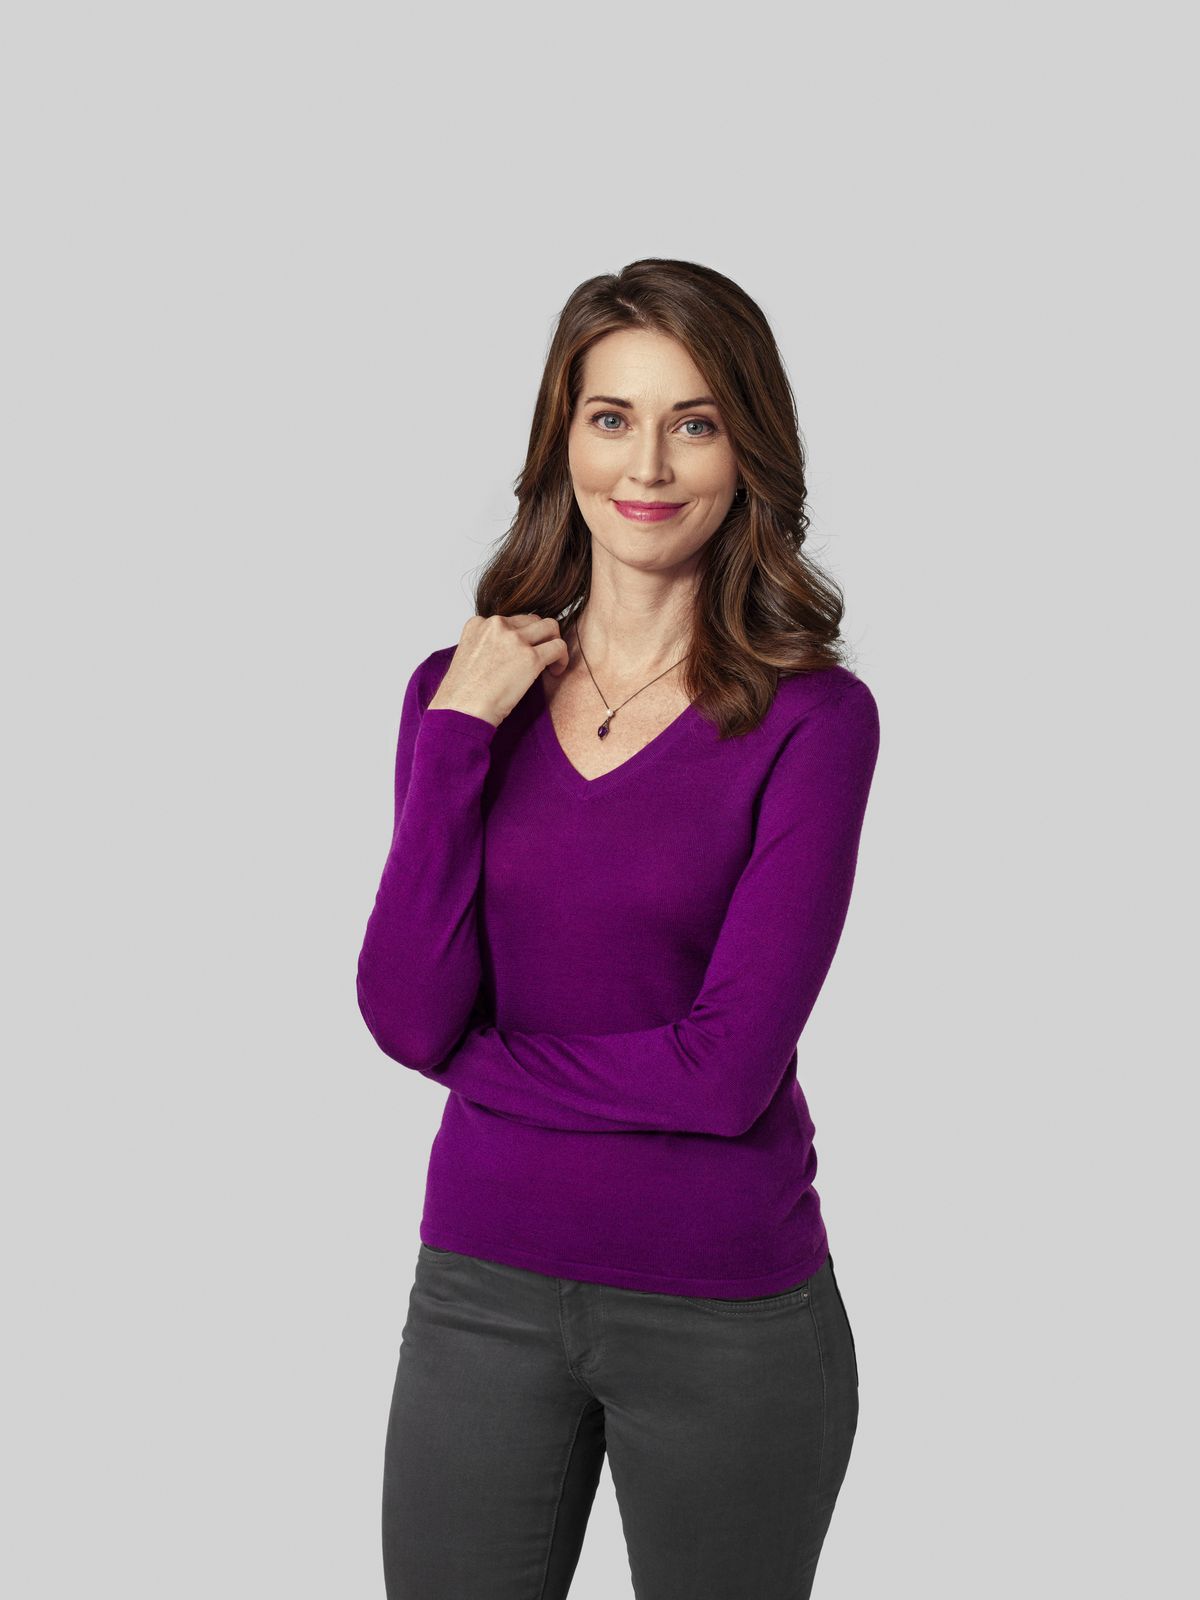 Woman in purple sweater looking at camera